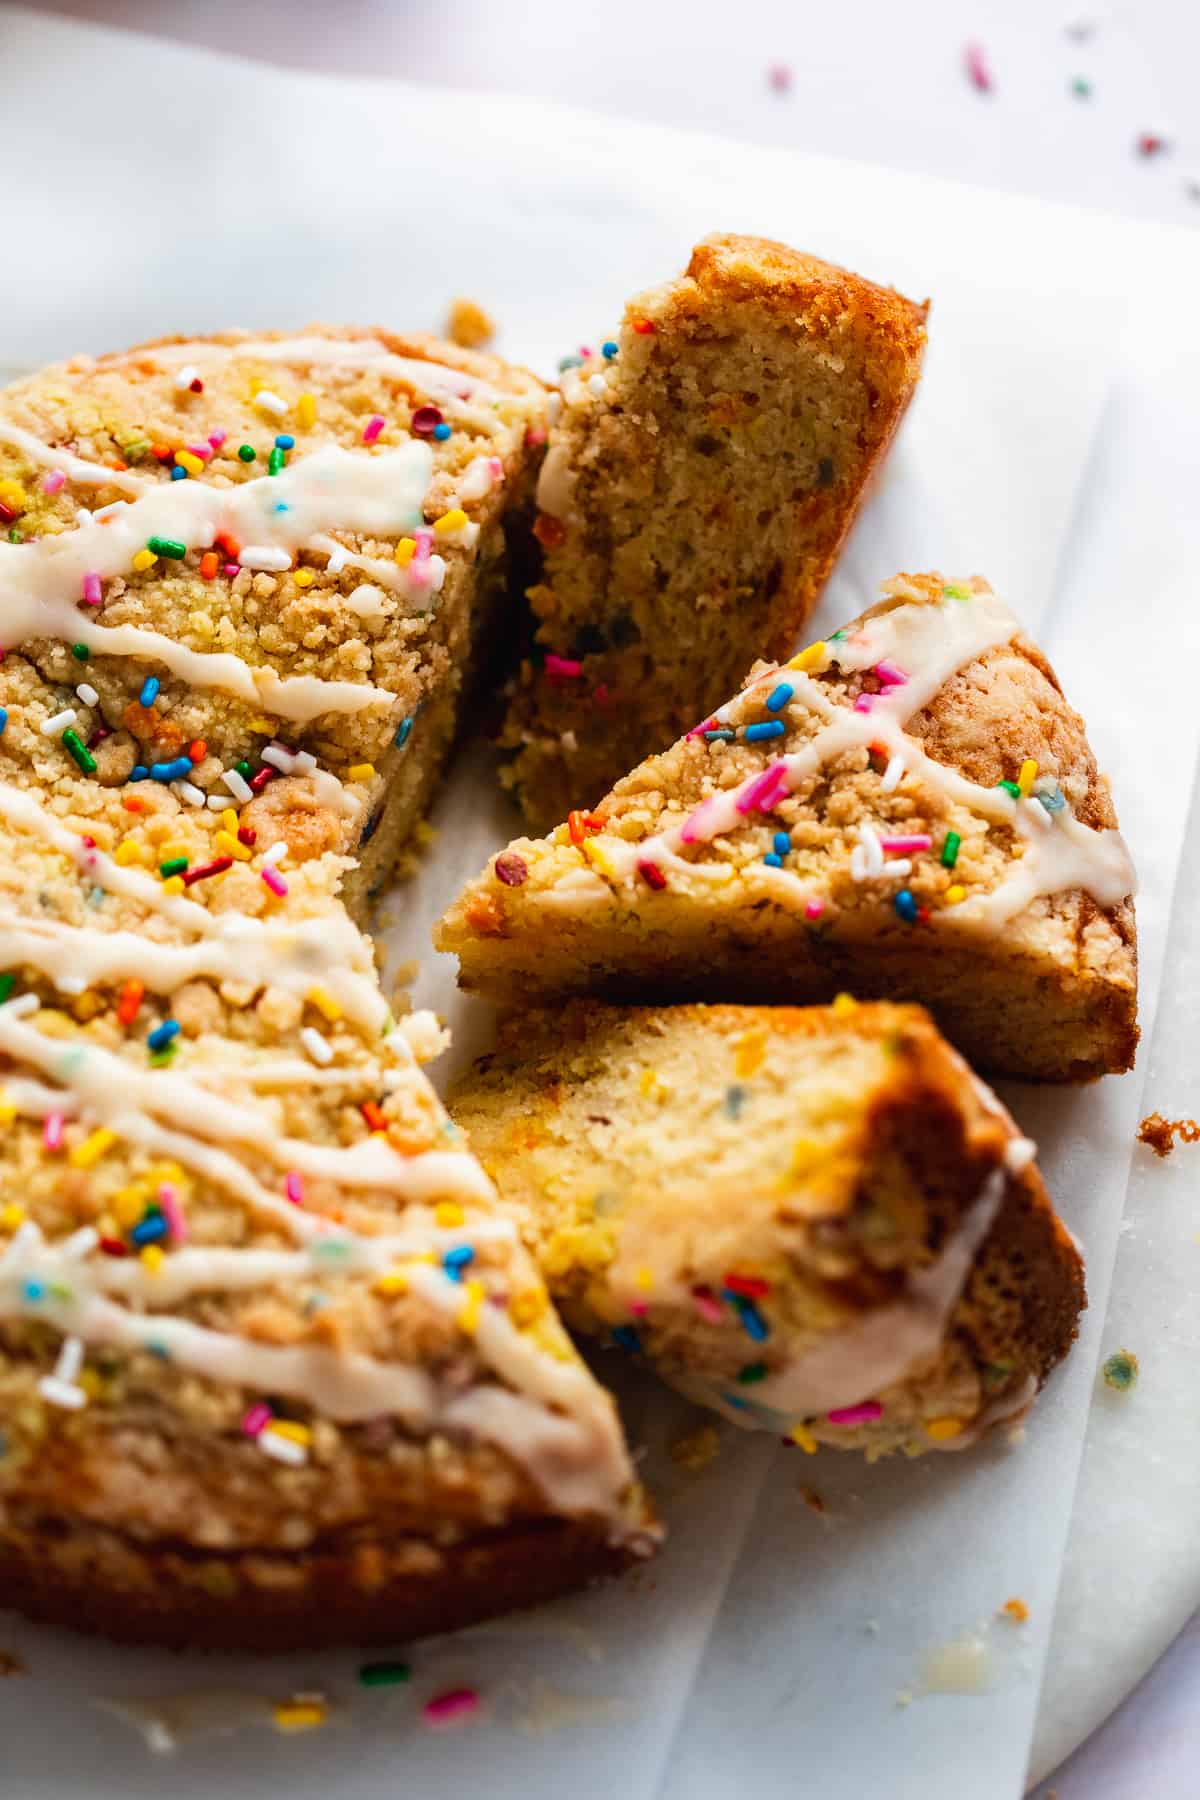 Coffee cake with sprinkles and icing on top cut into triangles.